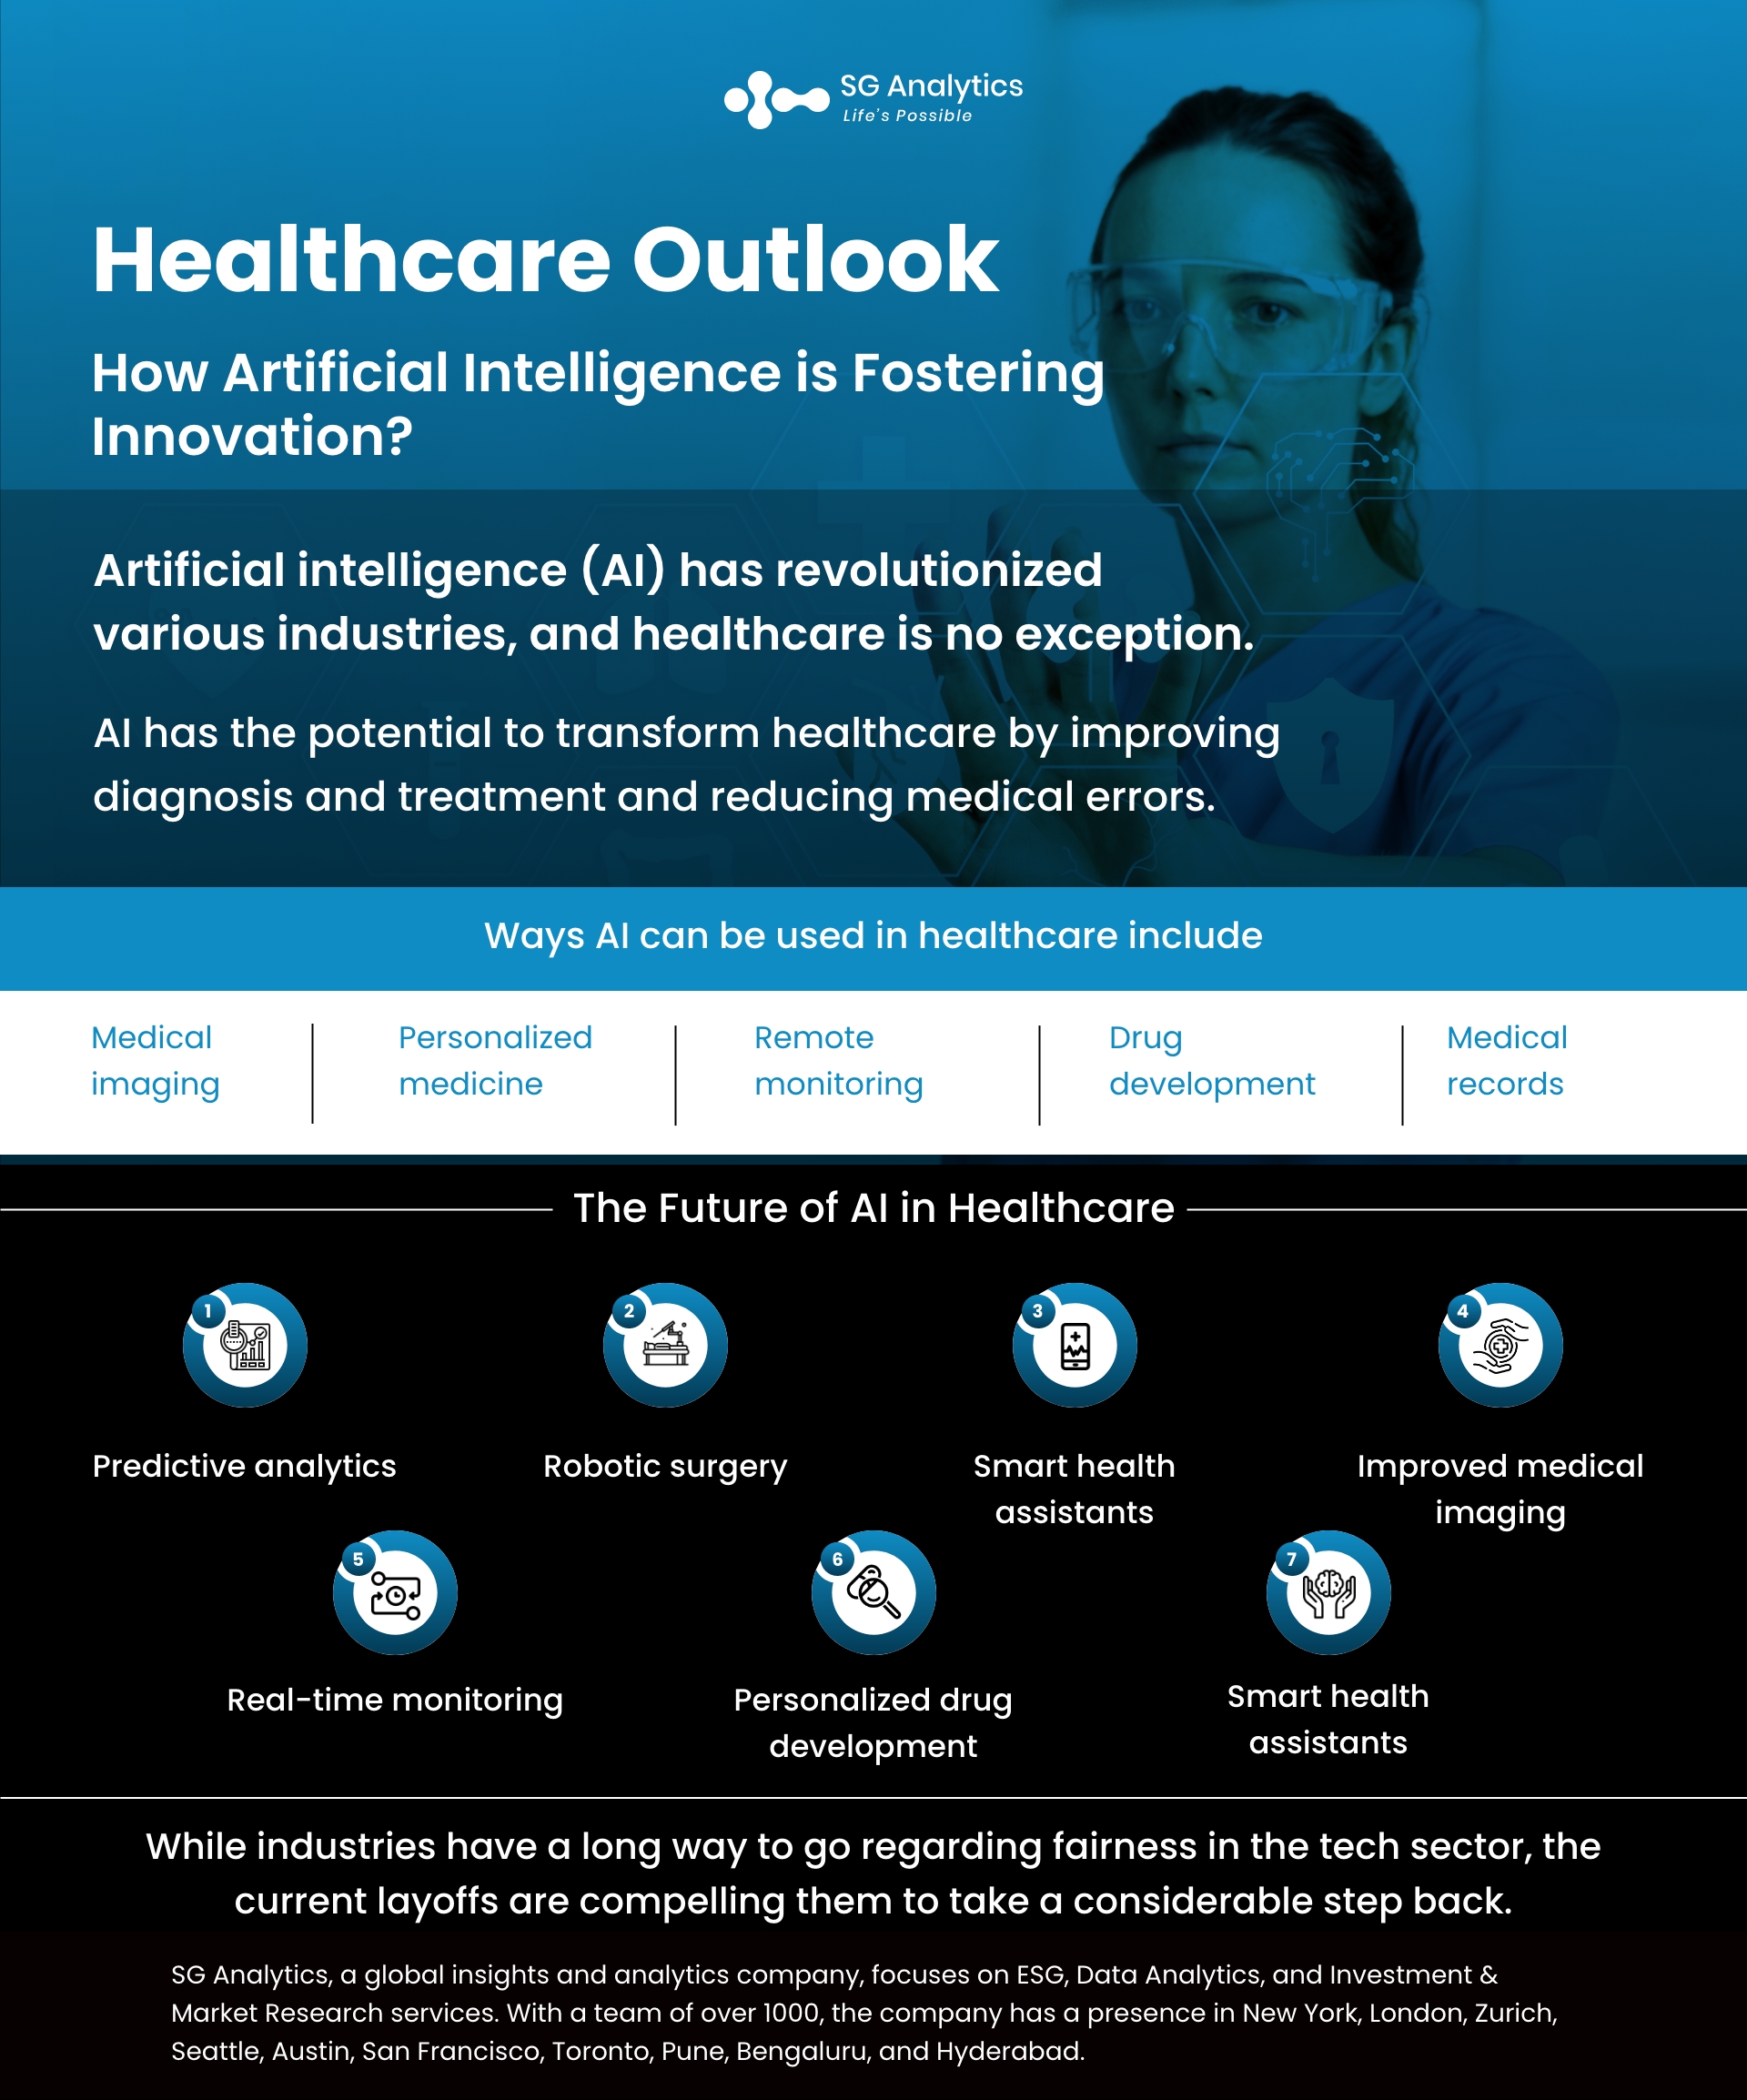 Healthcare Outlook How Artificial Intelligence is Fostering Innovation